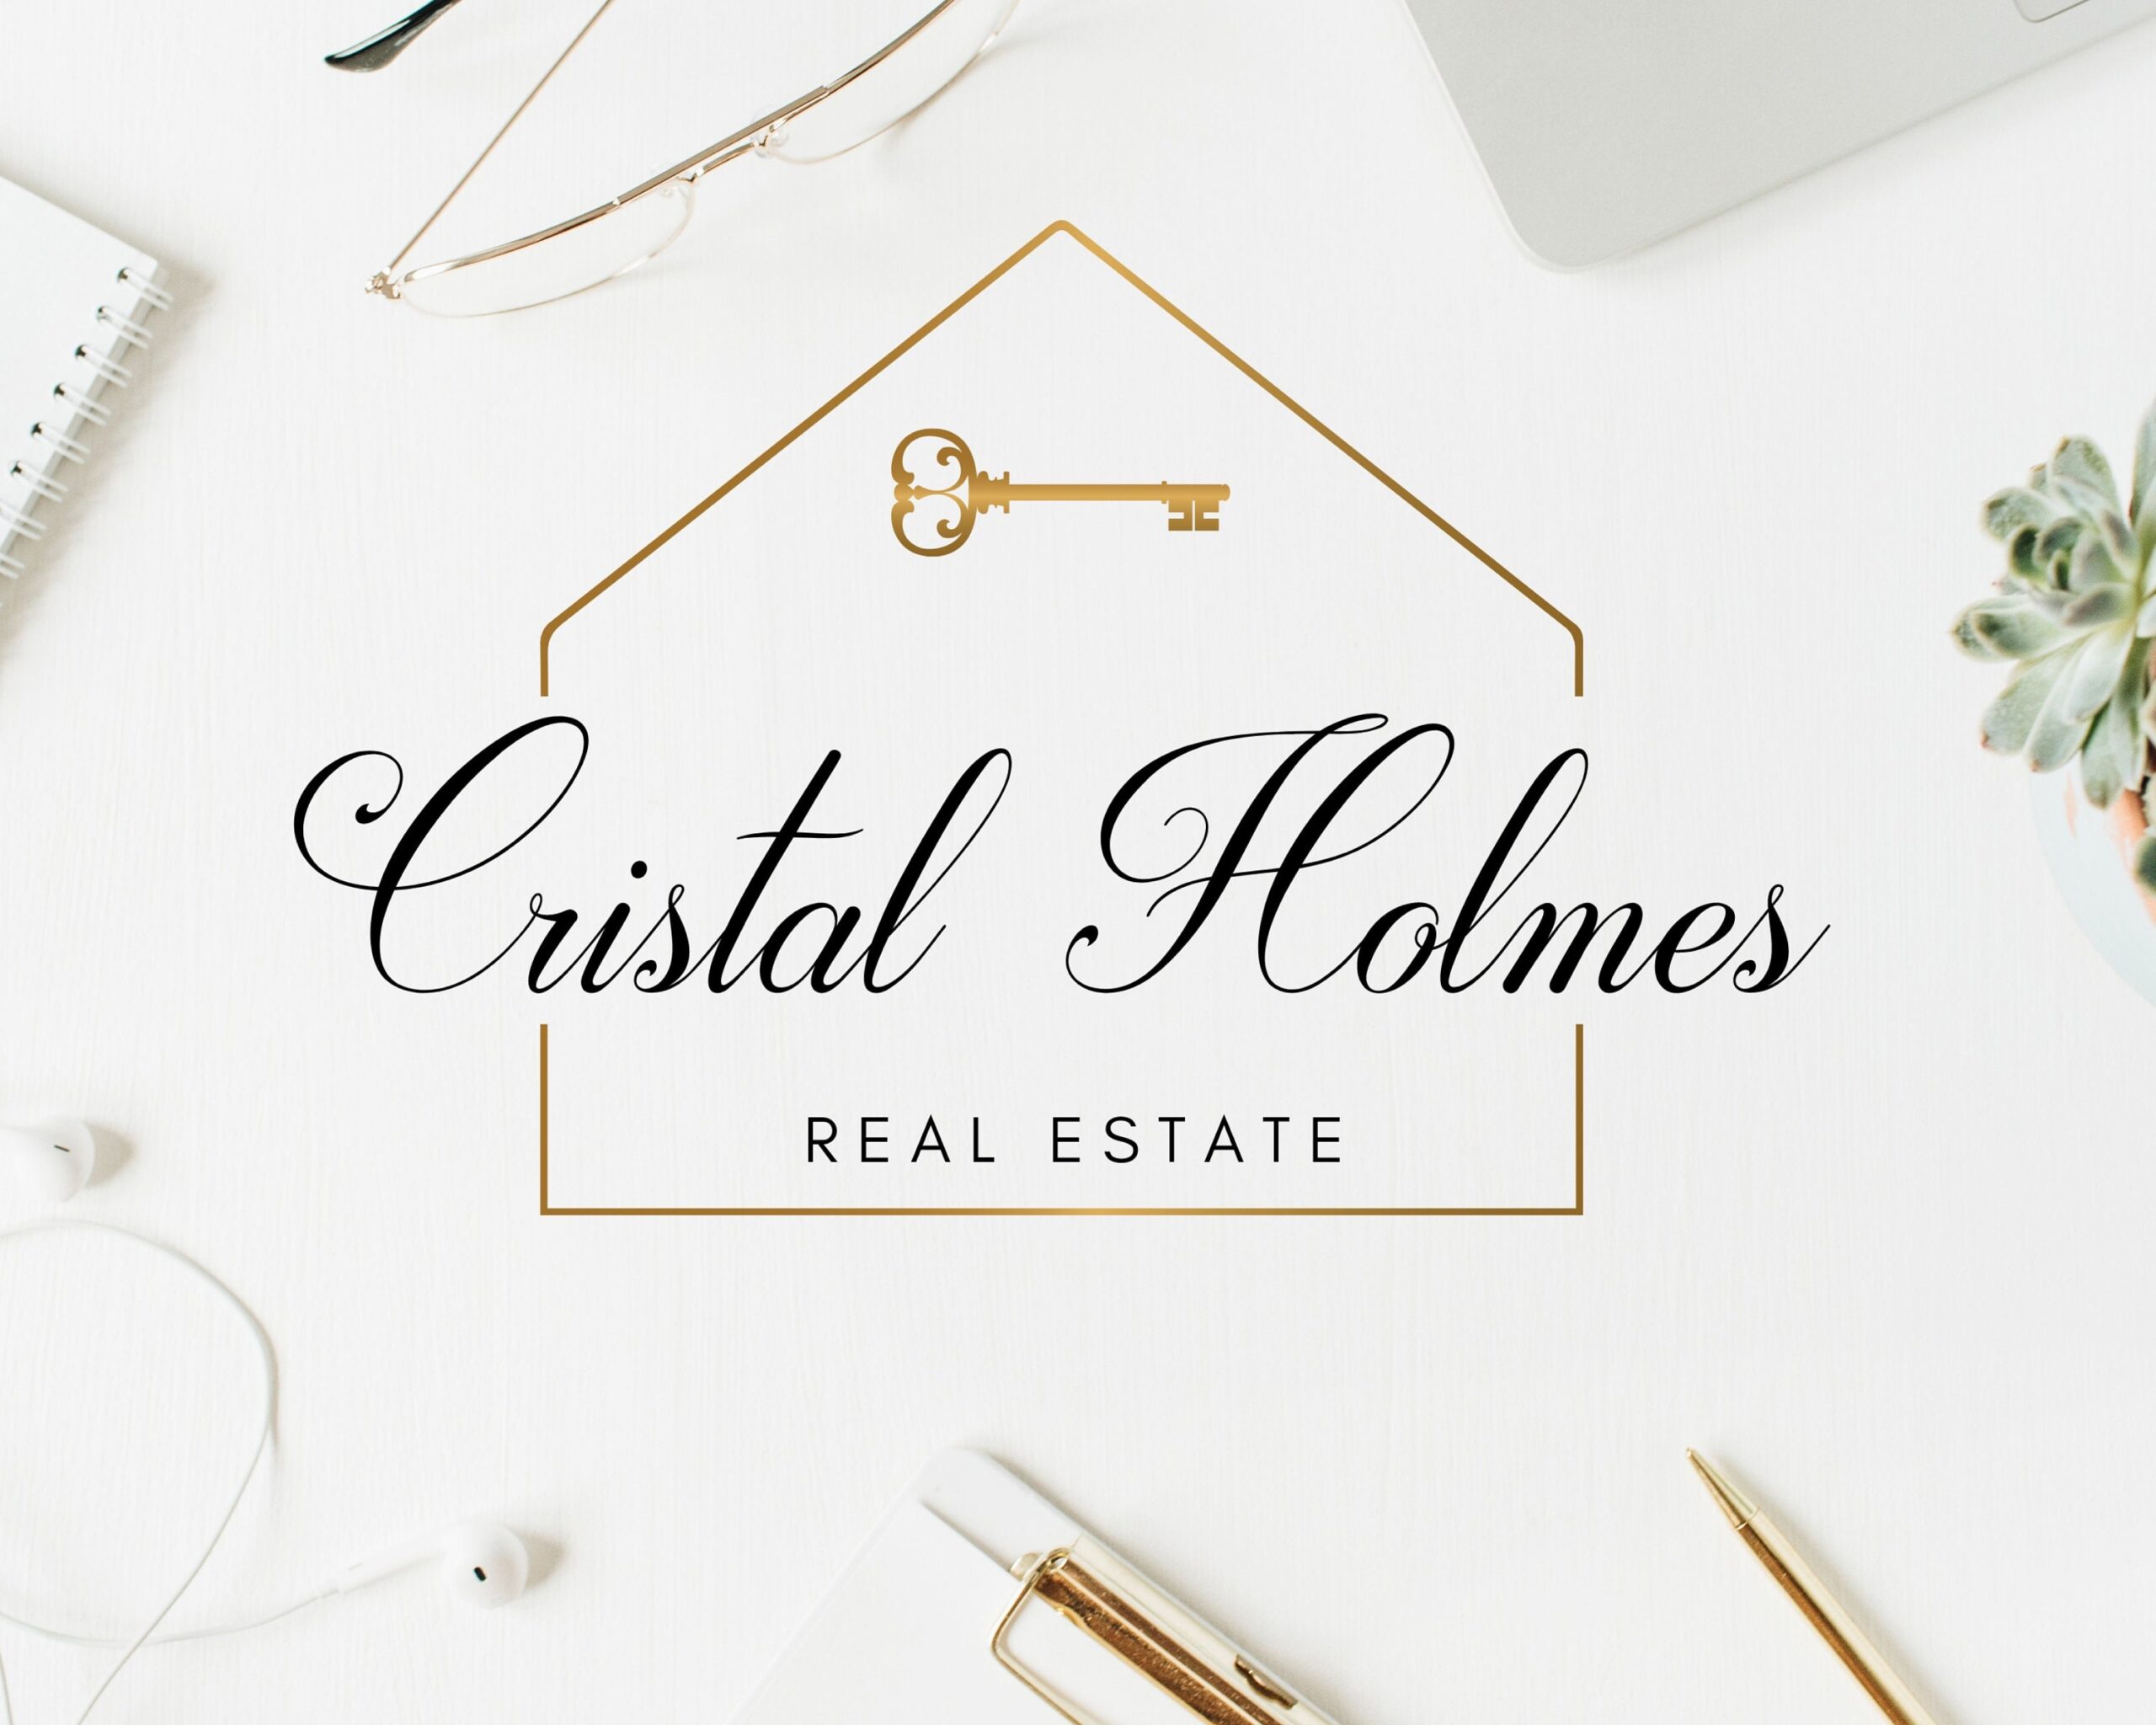 Premade Logo for Real Estate Agents - ALL DESIGNS INCLUDED: Gold Realtor? Logos -  Submarks and Watermarks - High-Quality Print-Ready and Web